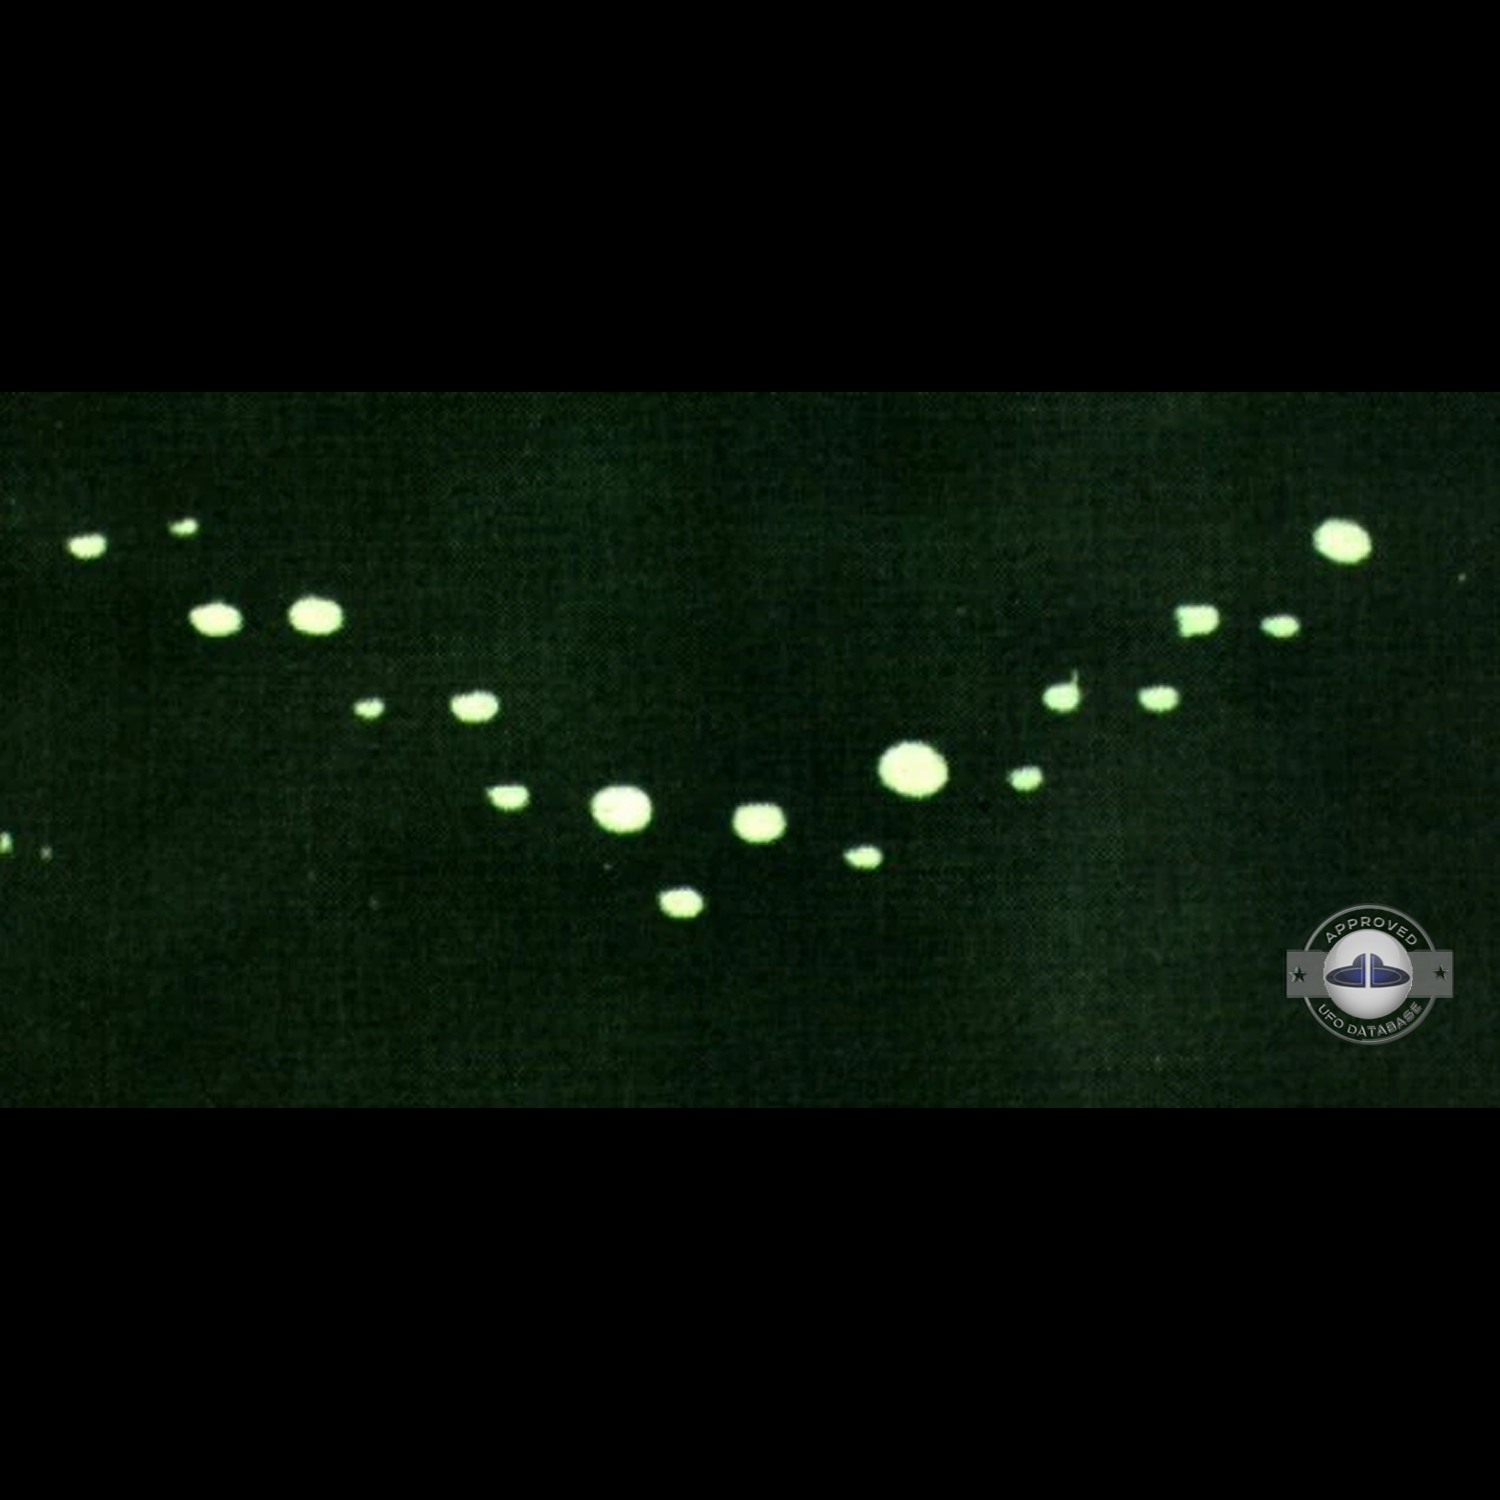 UFO picture show 18 luminous UFO arranged in a crescent formation UFO Picture #117-7